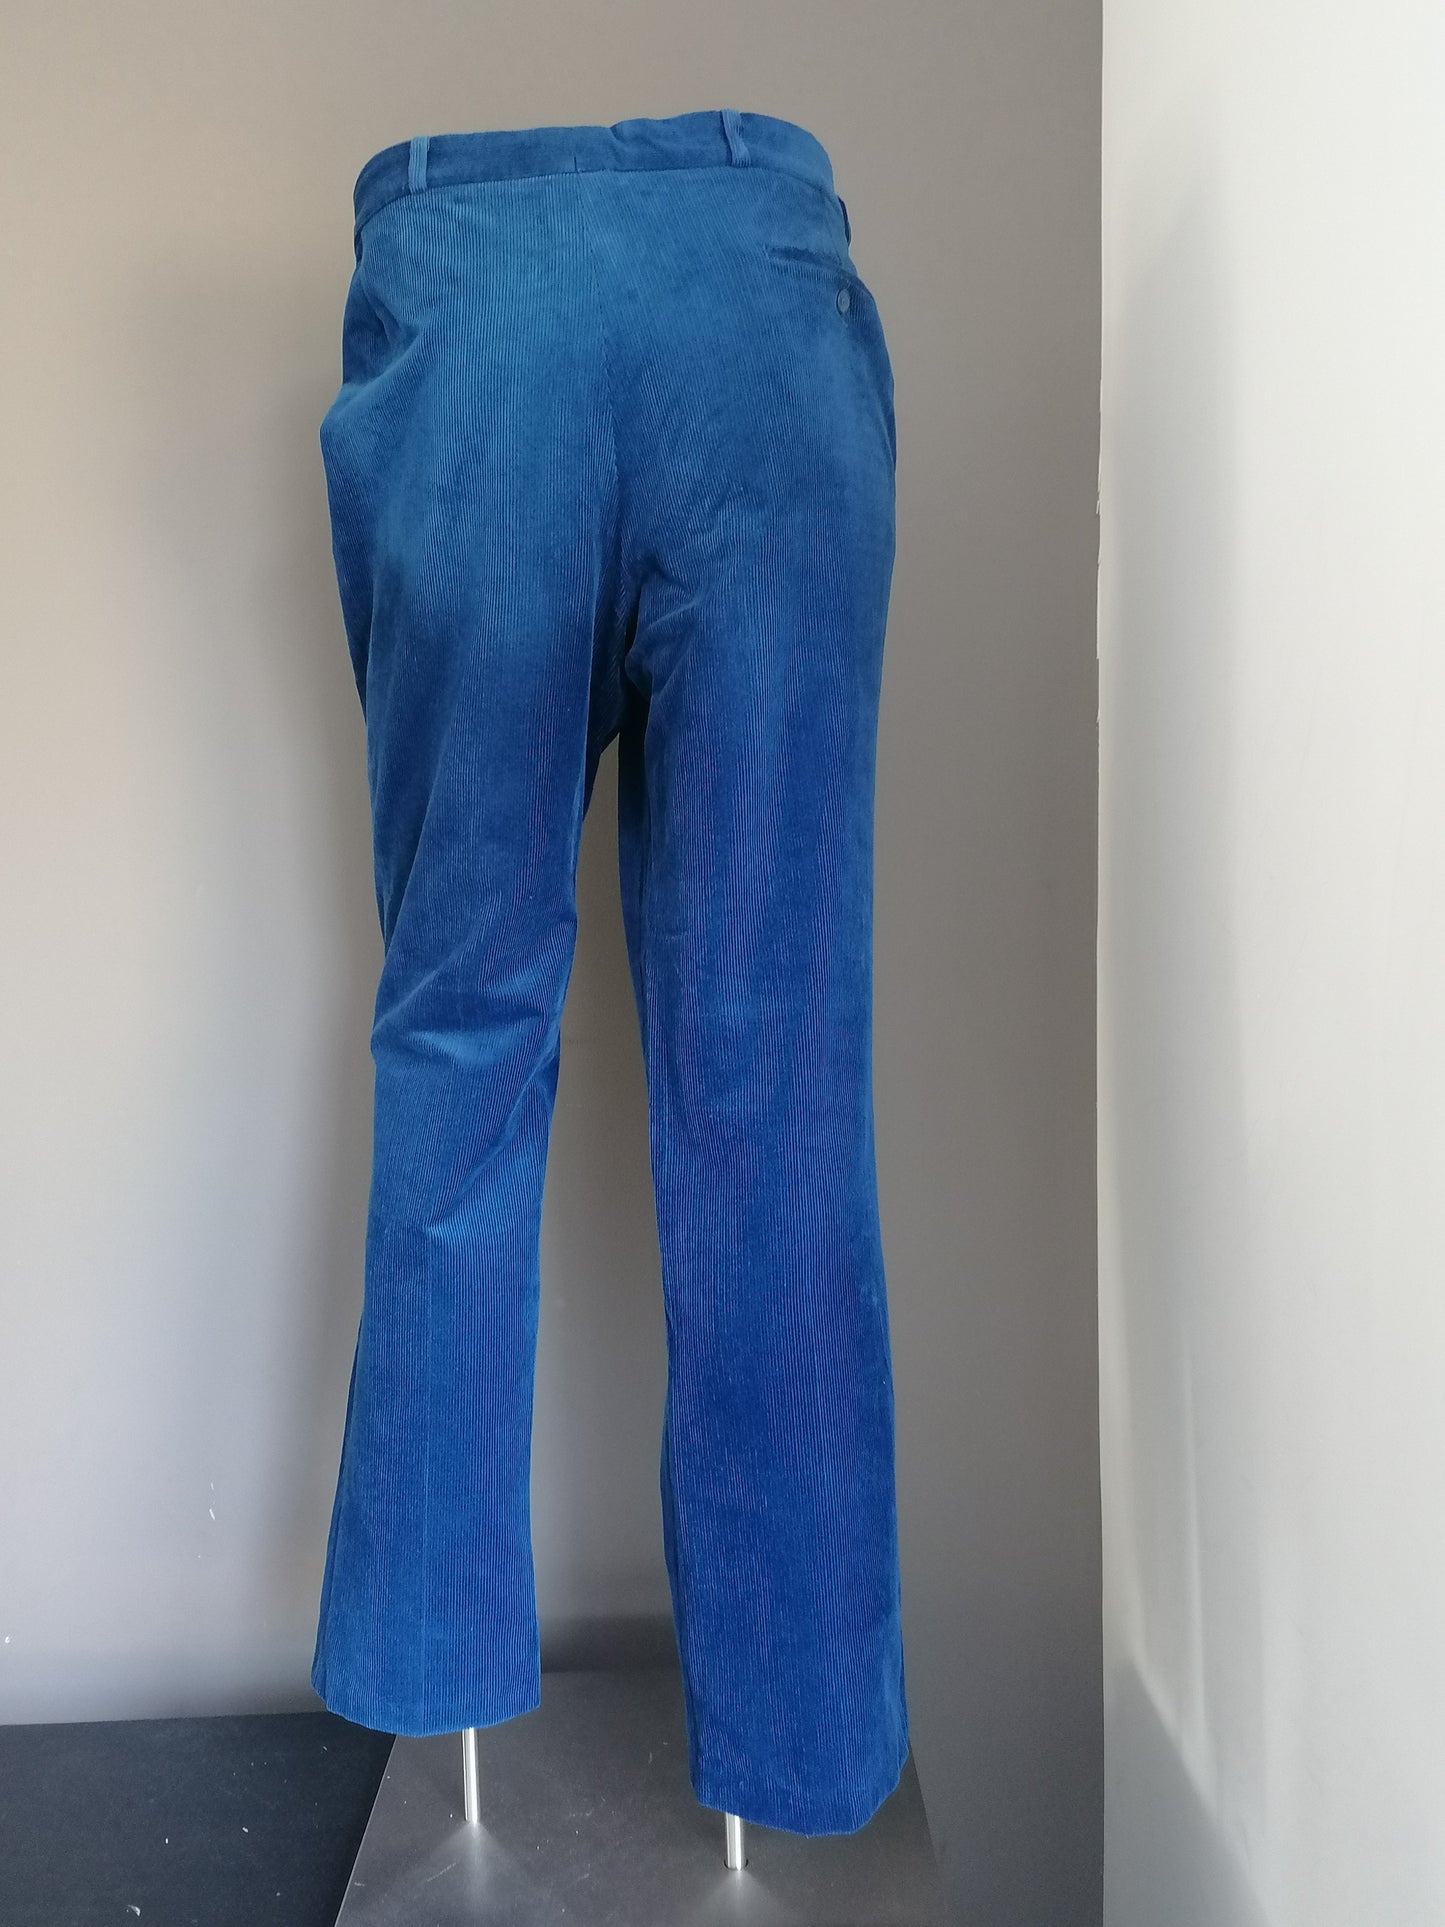 Comfort stretch rib pants / trousers. Blue colored. Size 27 (54/L)